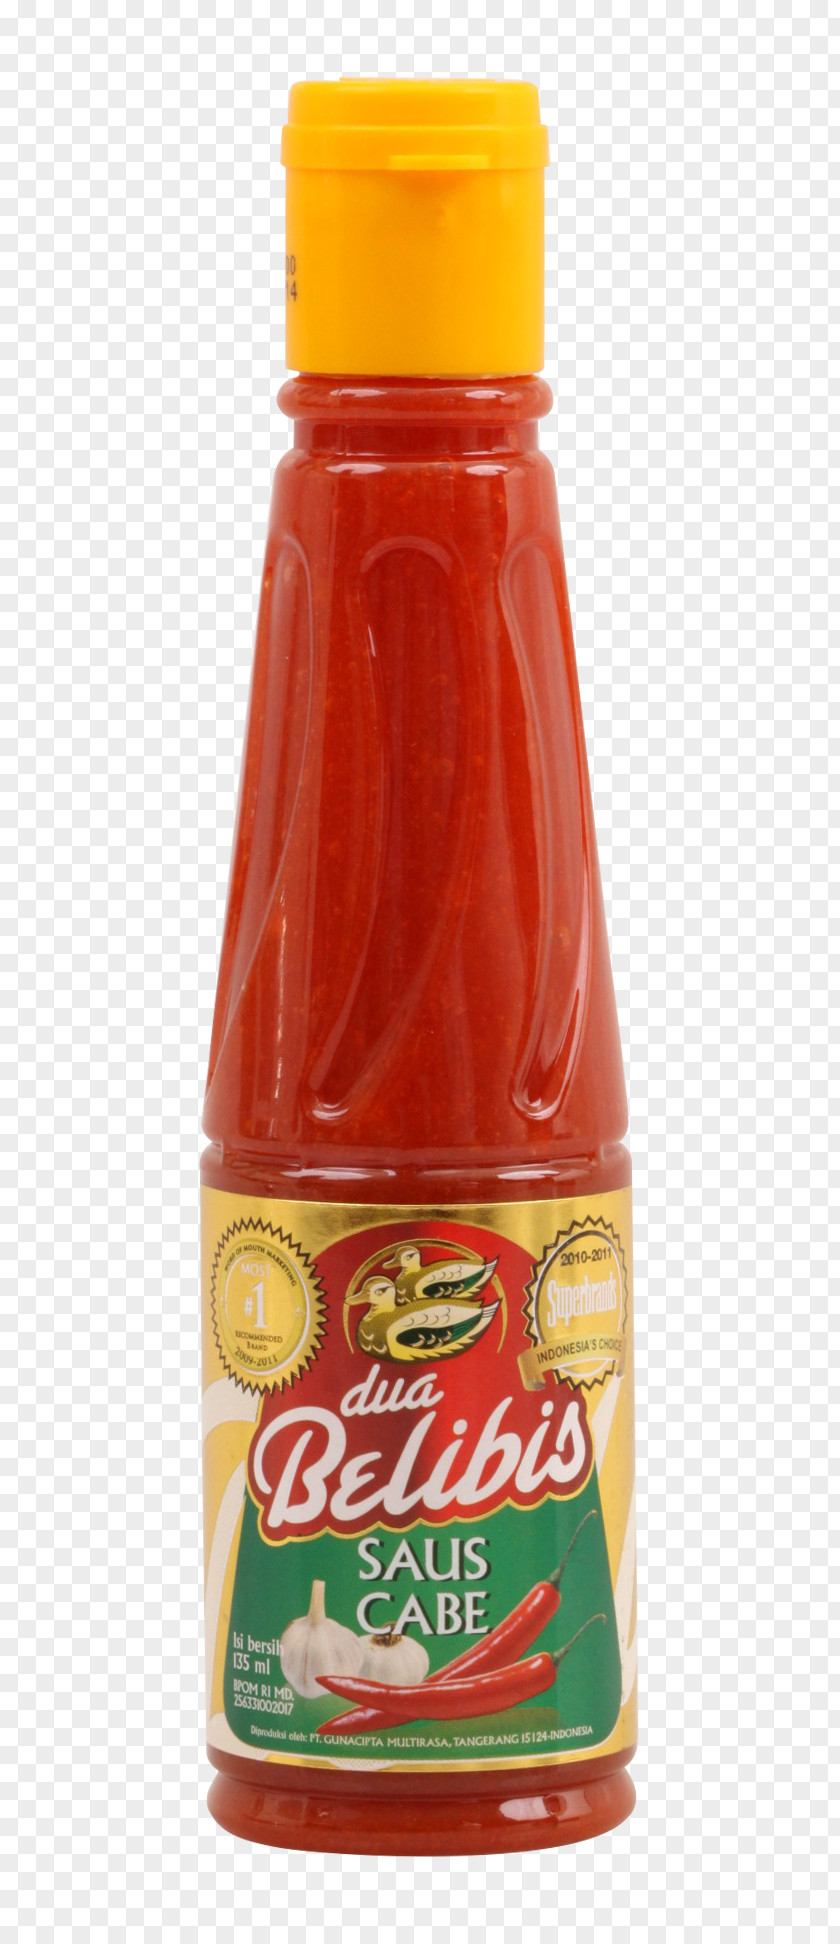 Chilli Sauce Sweet Chili Indonesian Cuisine Hot Pepper PNG